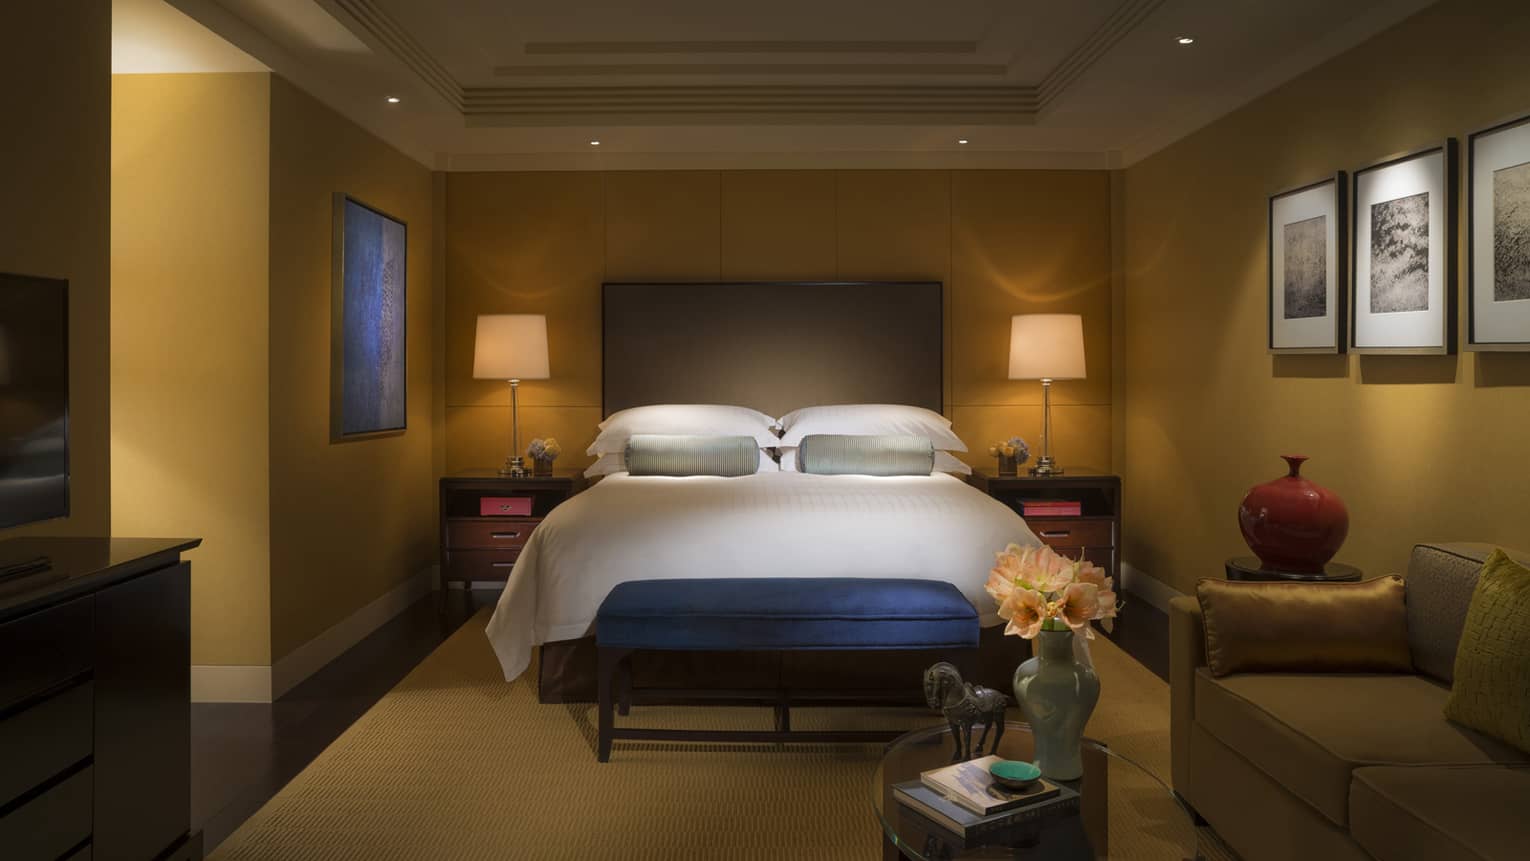 Dimly-lit hotel room bed with tall padded headboard, small blue bench at foot, small table with vase, horse statue